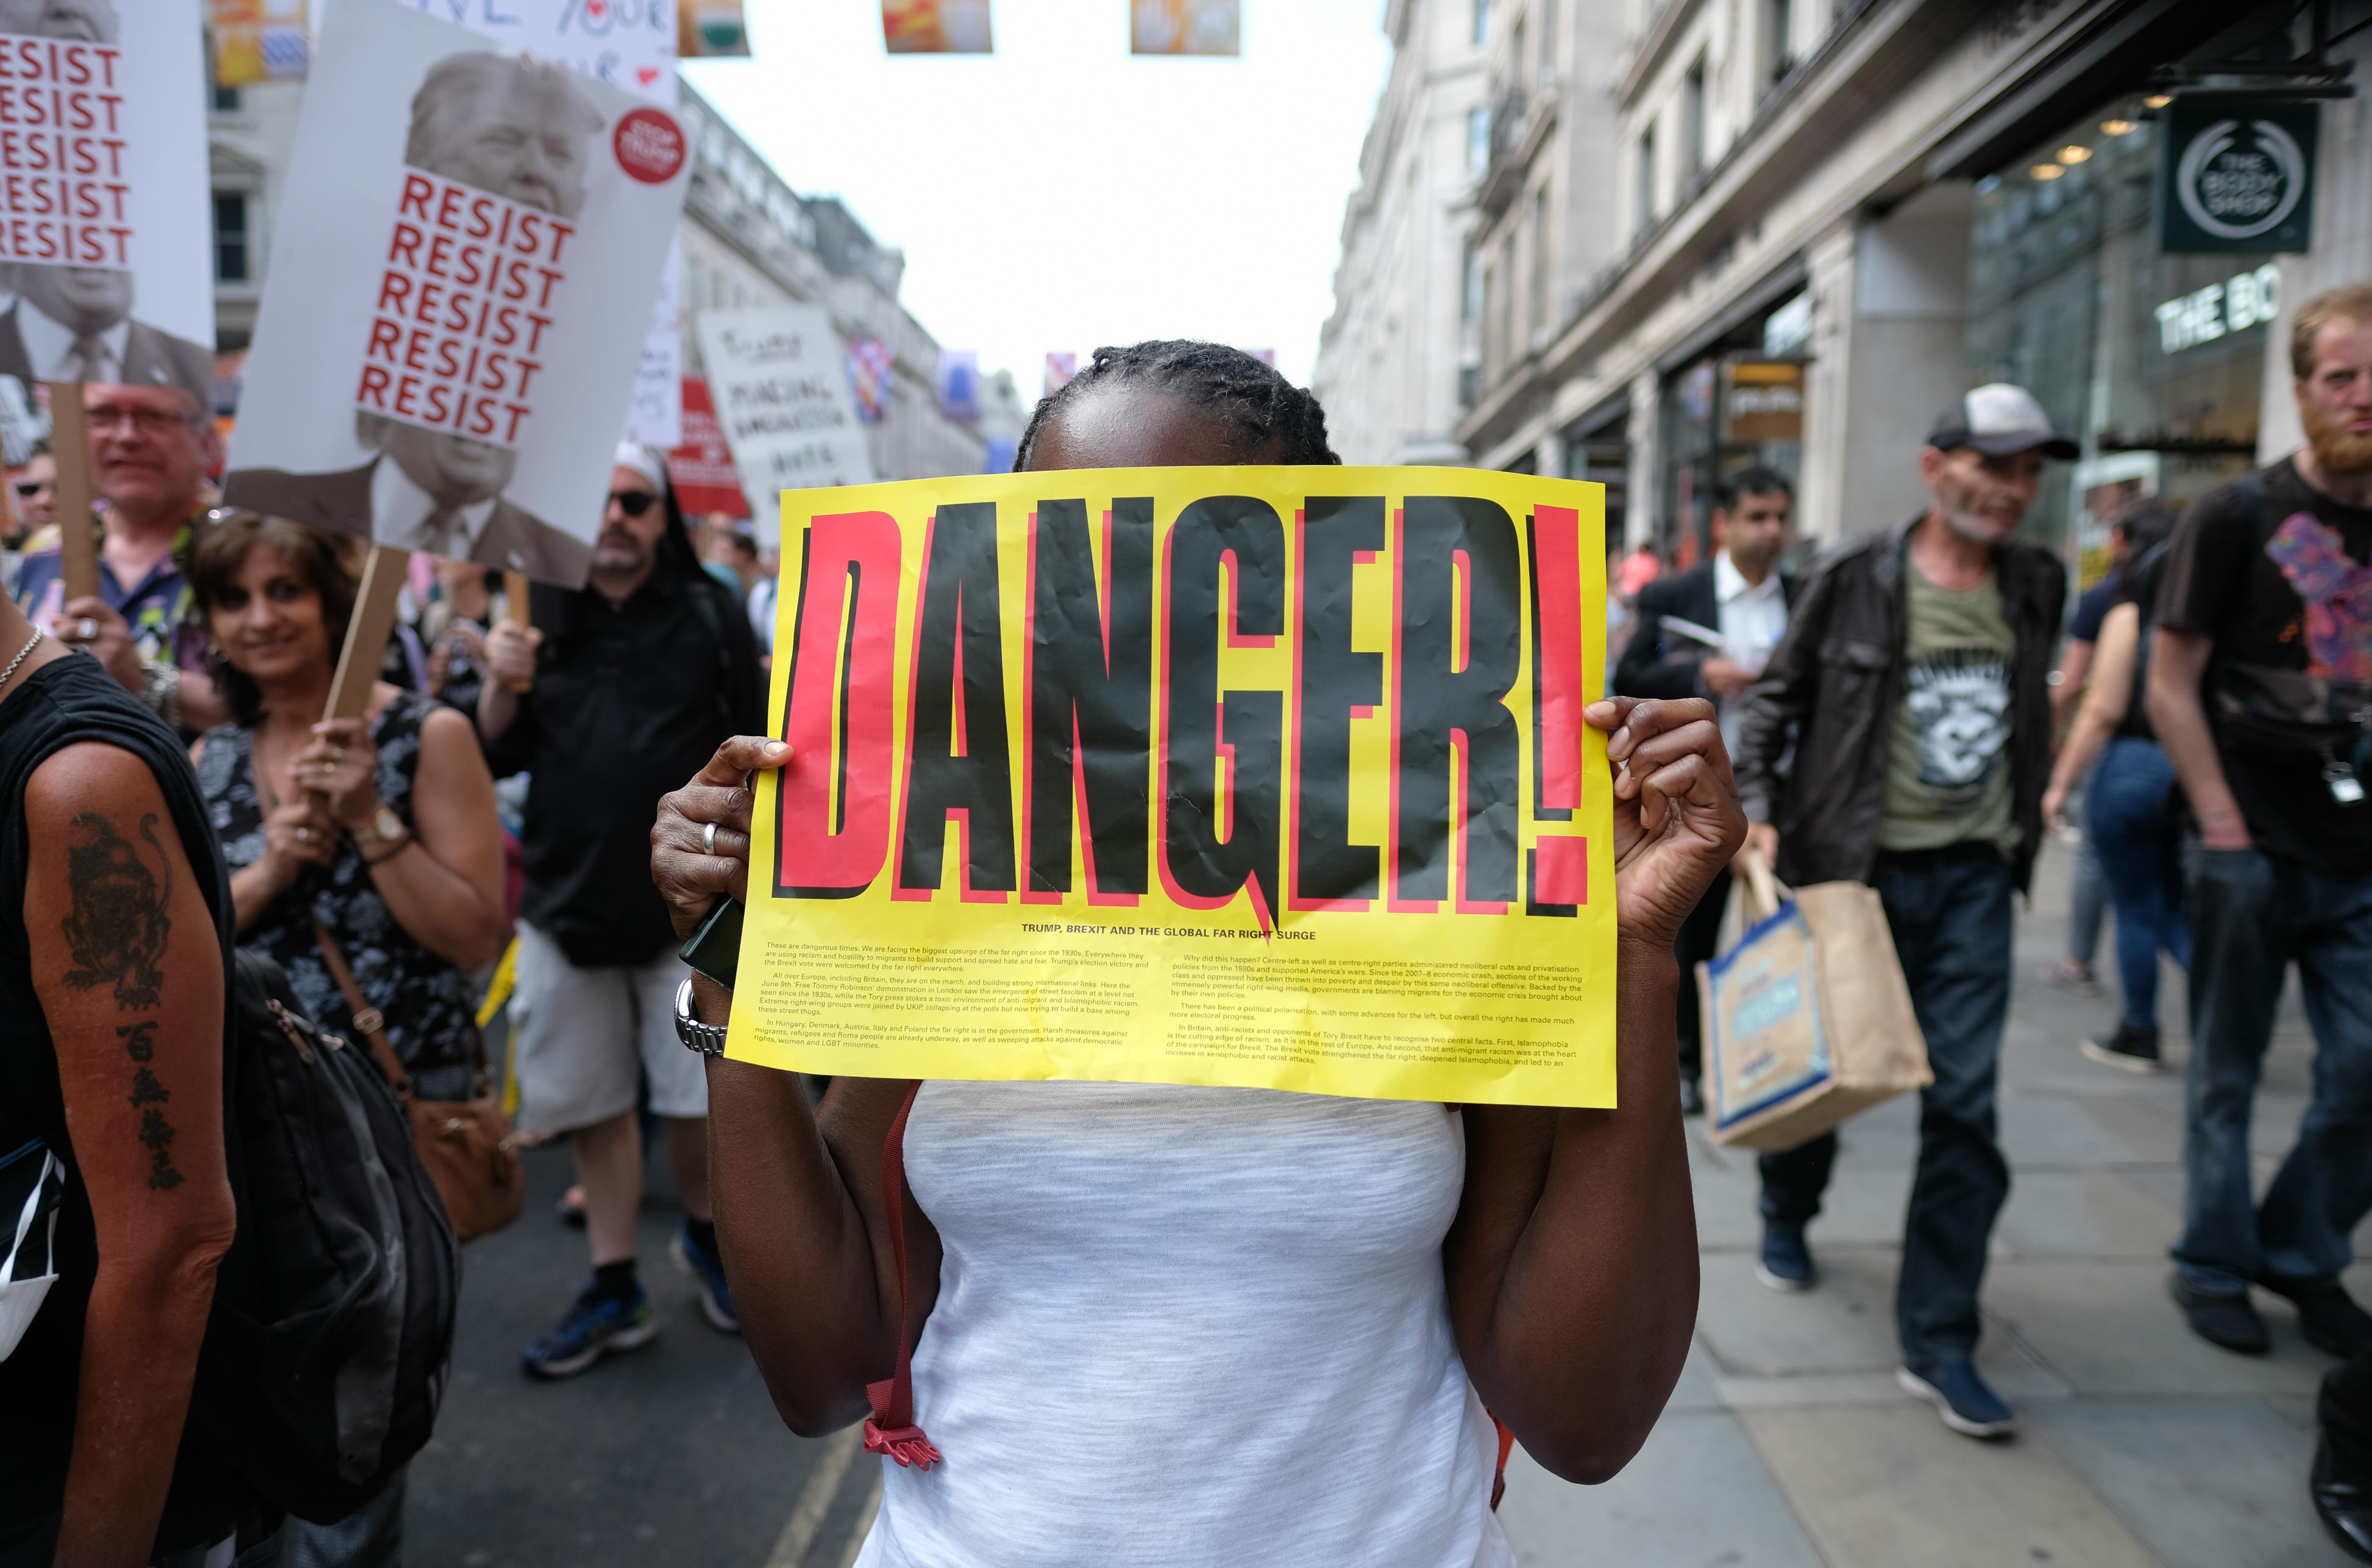 London protest in respond to President Trump’s visit, July 2018